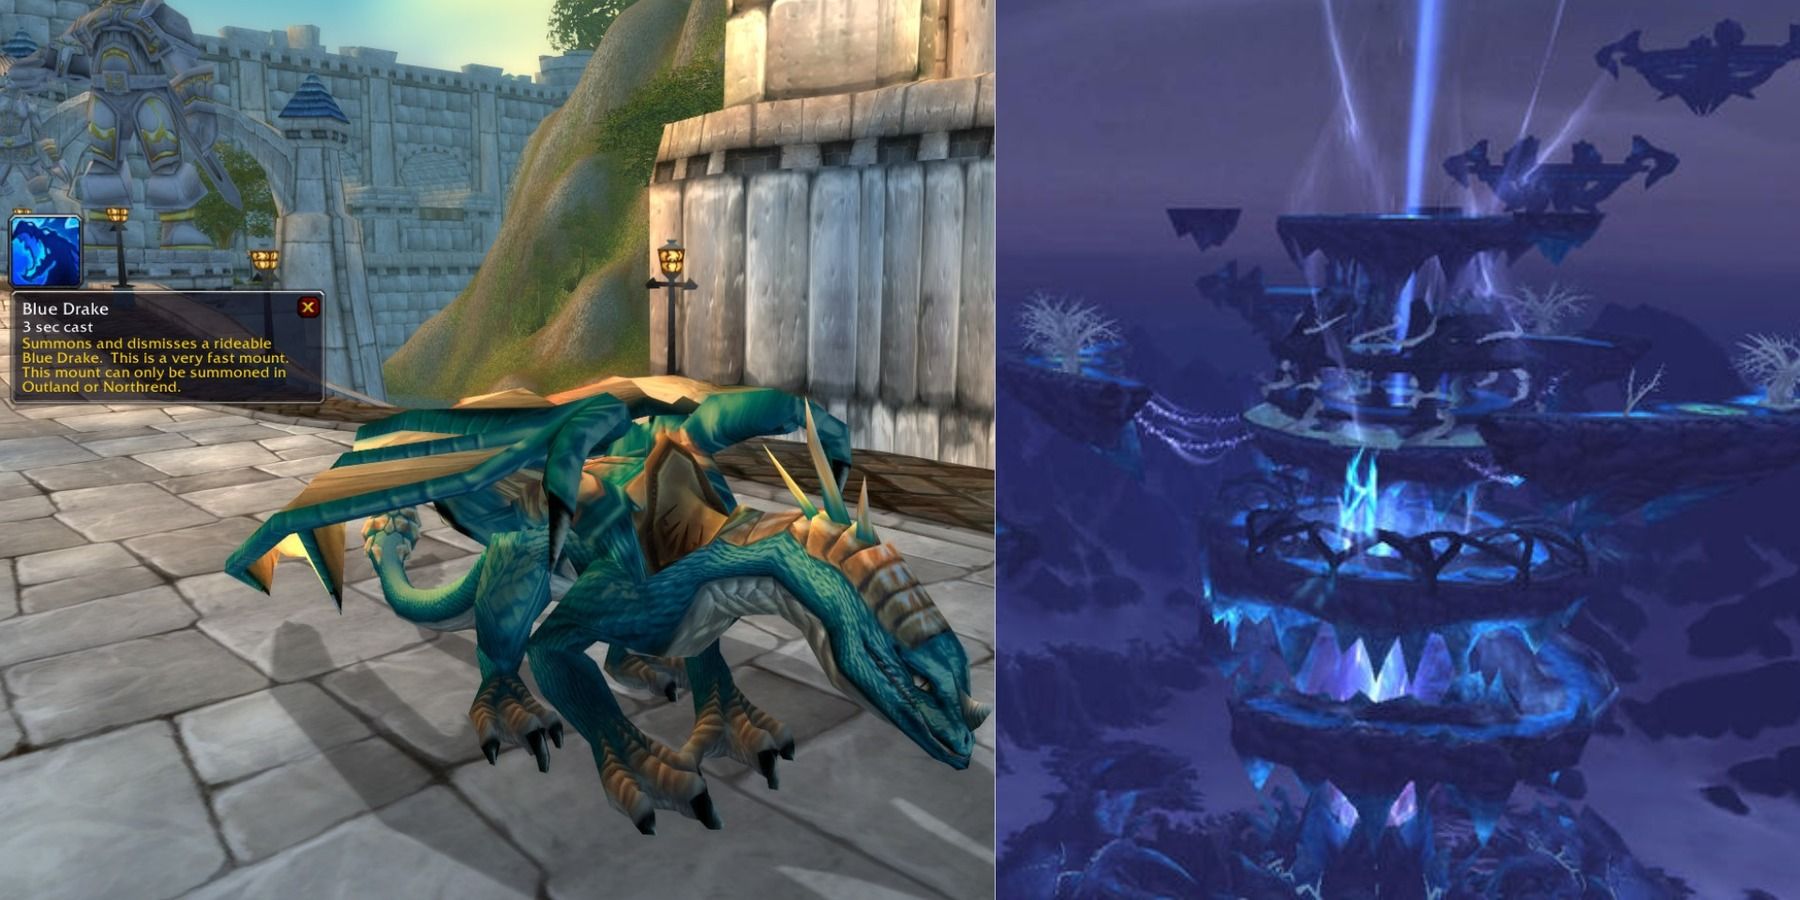 WoW, WotLK mount, blue drake and the eye of eternity